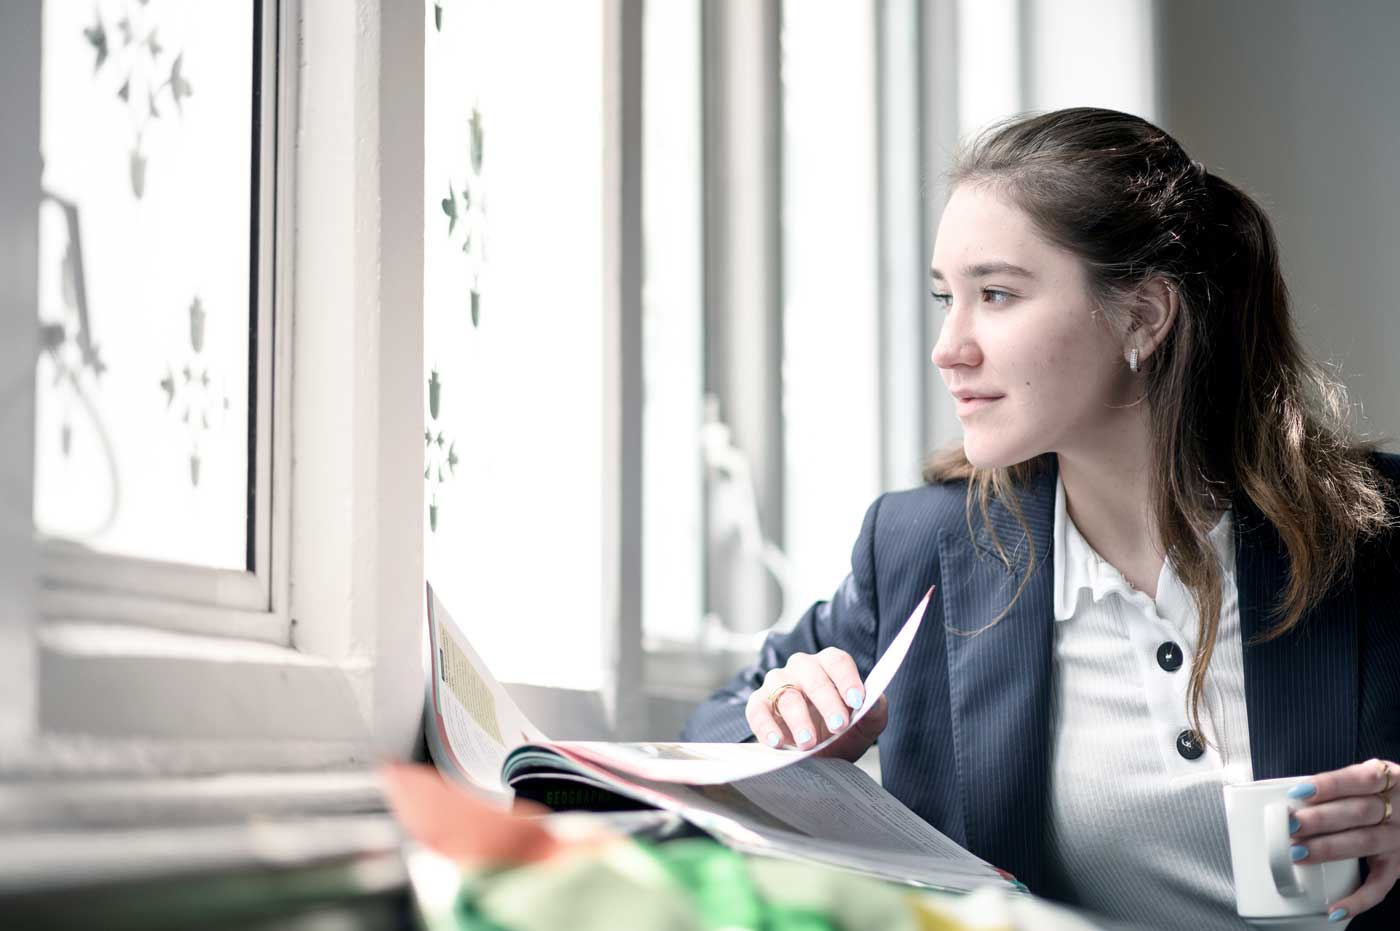 Female student sitting at a window with a book